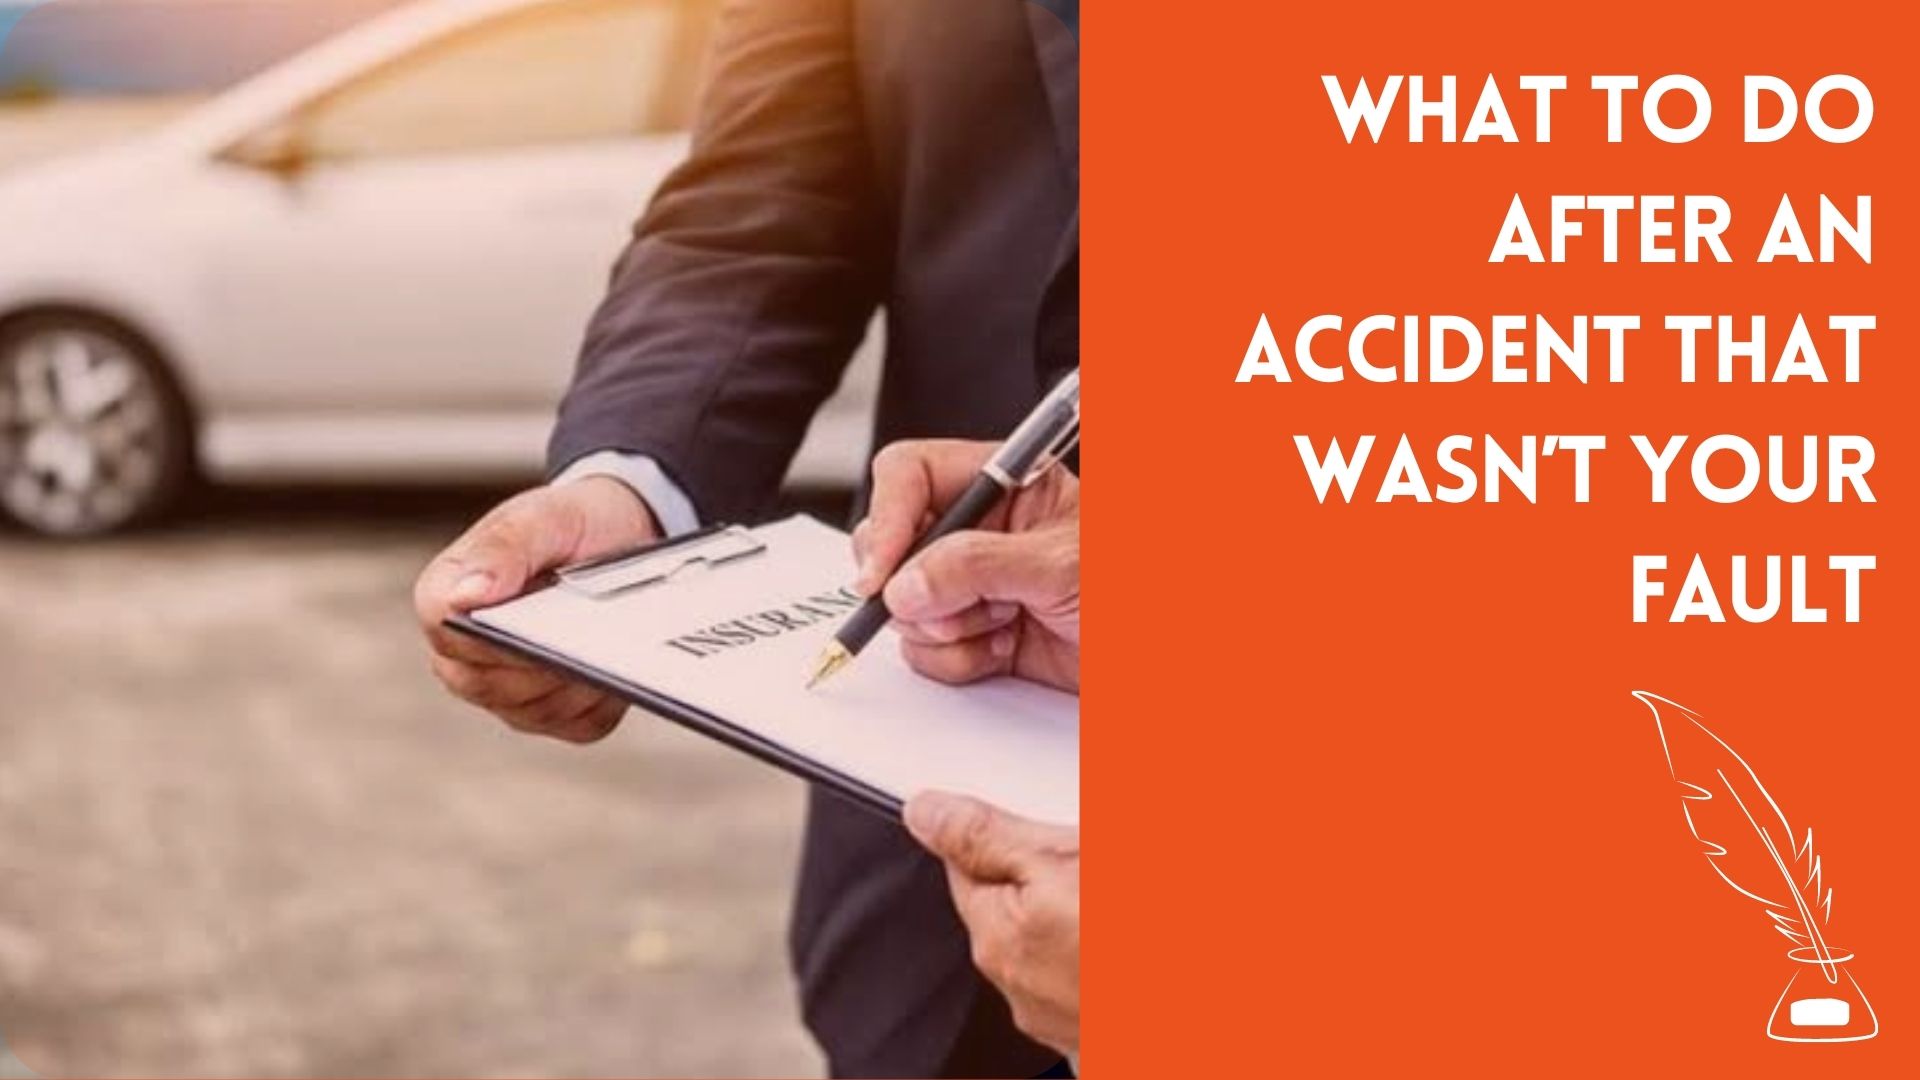 What to Do After an Accident That Wasn’t Your Fault